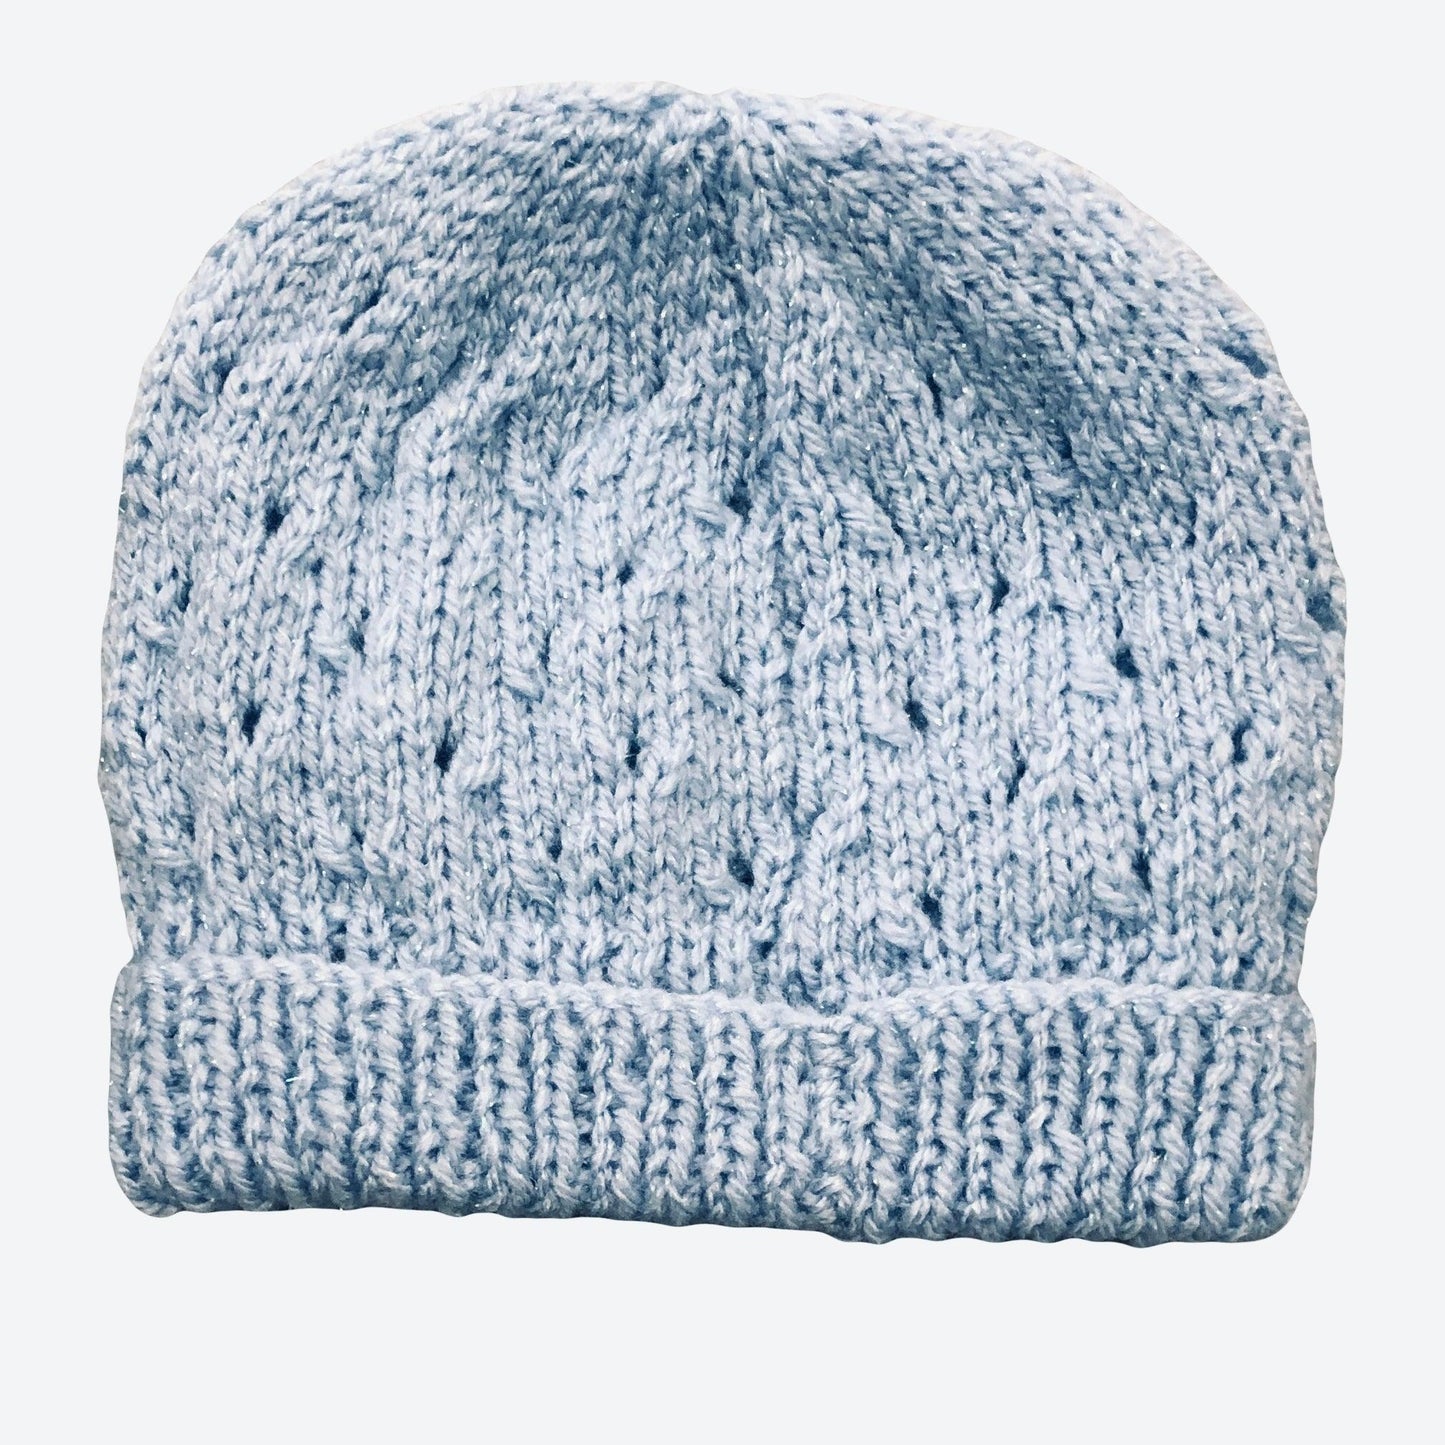 Beautiful Hand Knitted Sparkly Hat | Oscar & Me | Baby & Children’s Clothing & Accessories